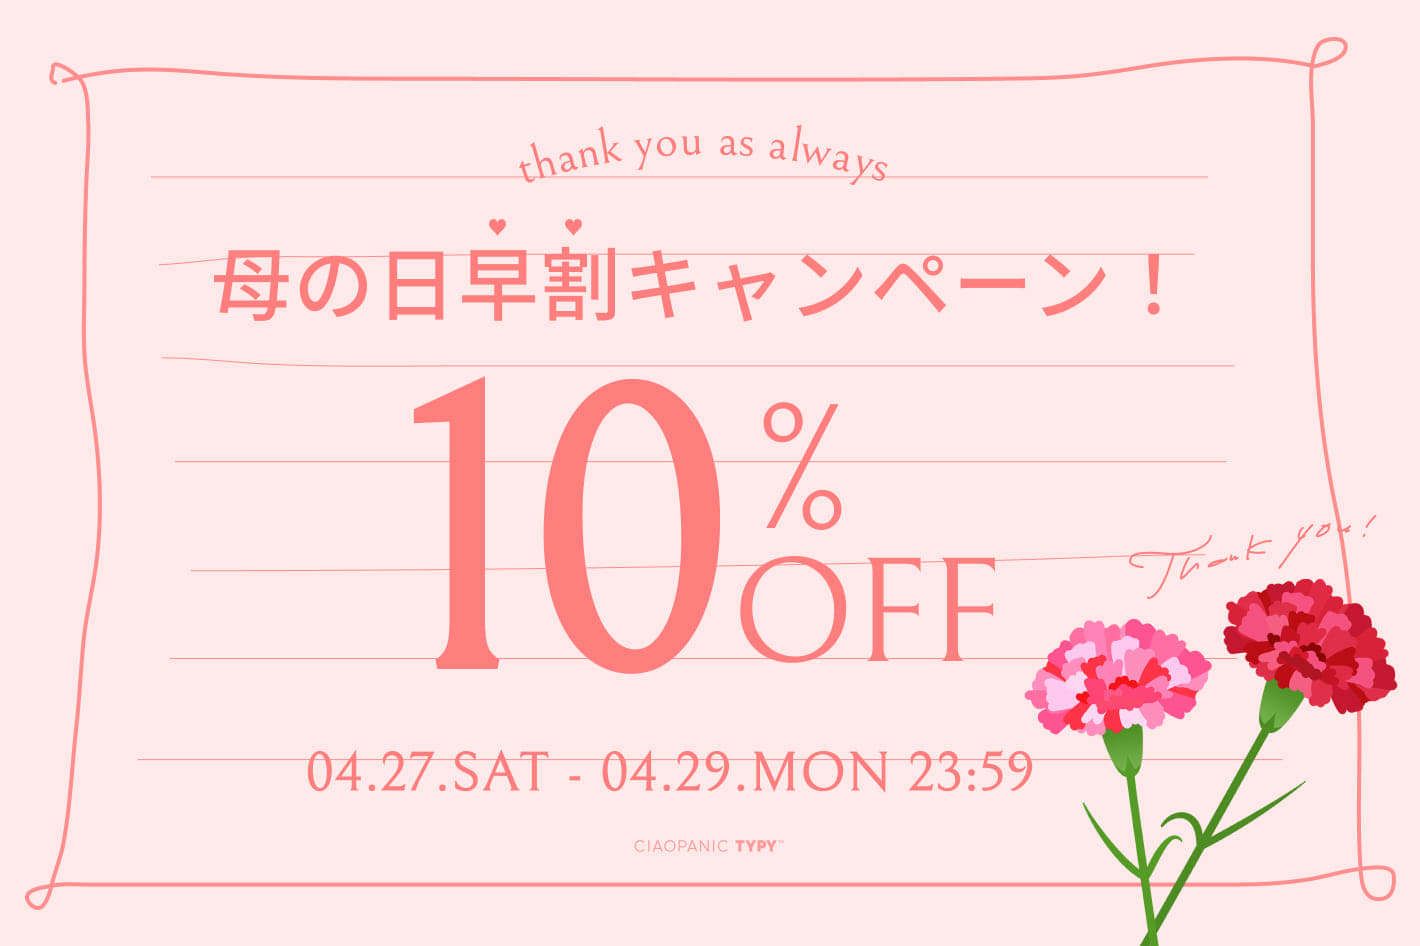 【CIAOPANIC TYPY】母の日早割10%OFFクーポン